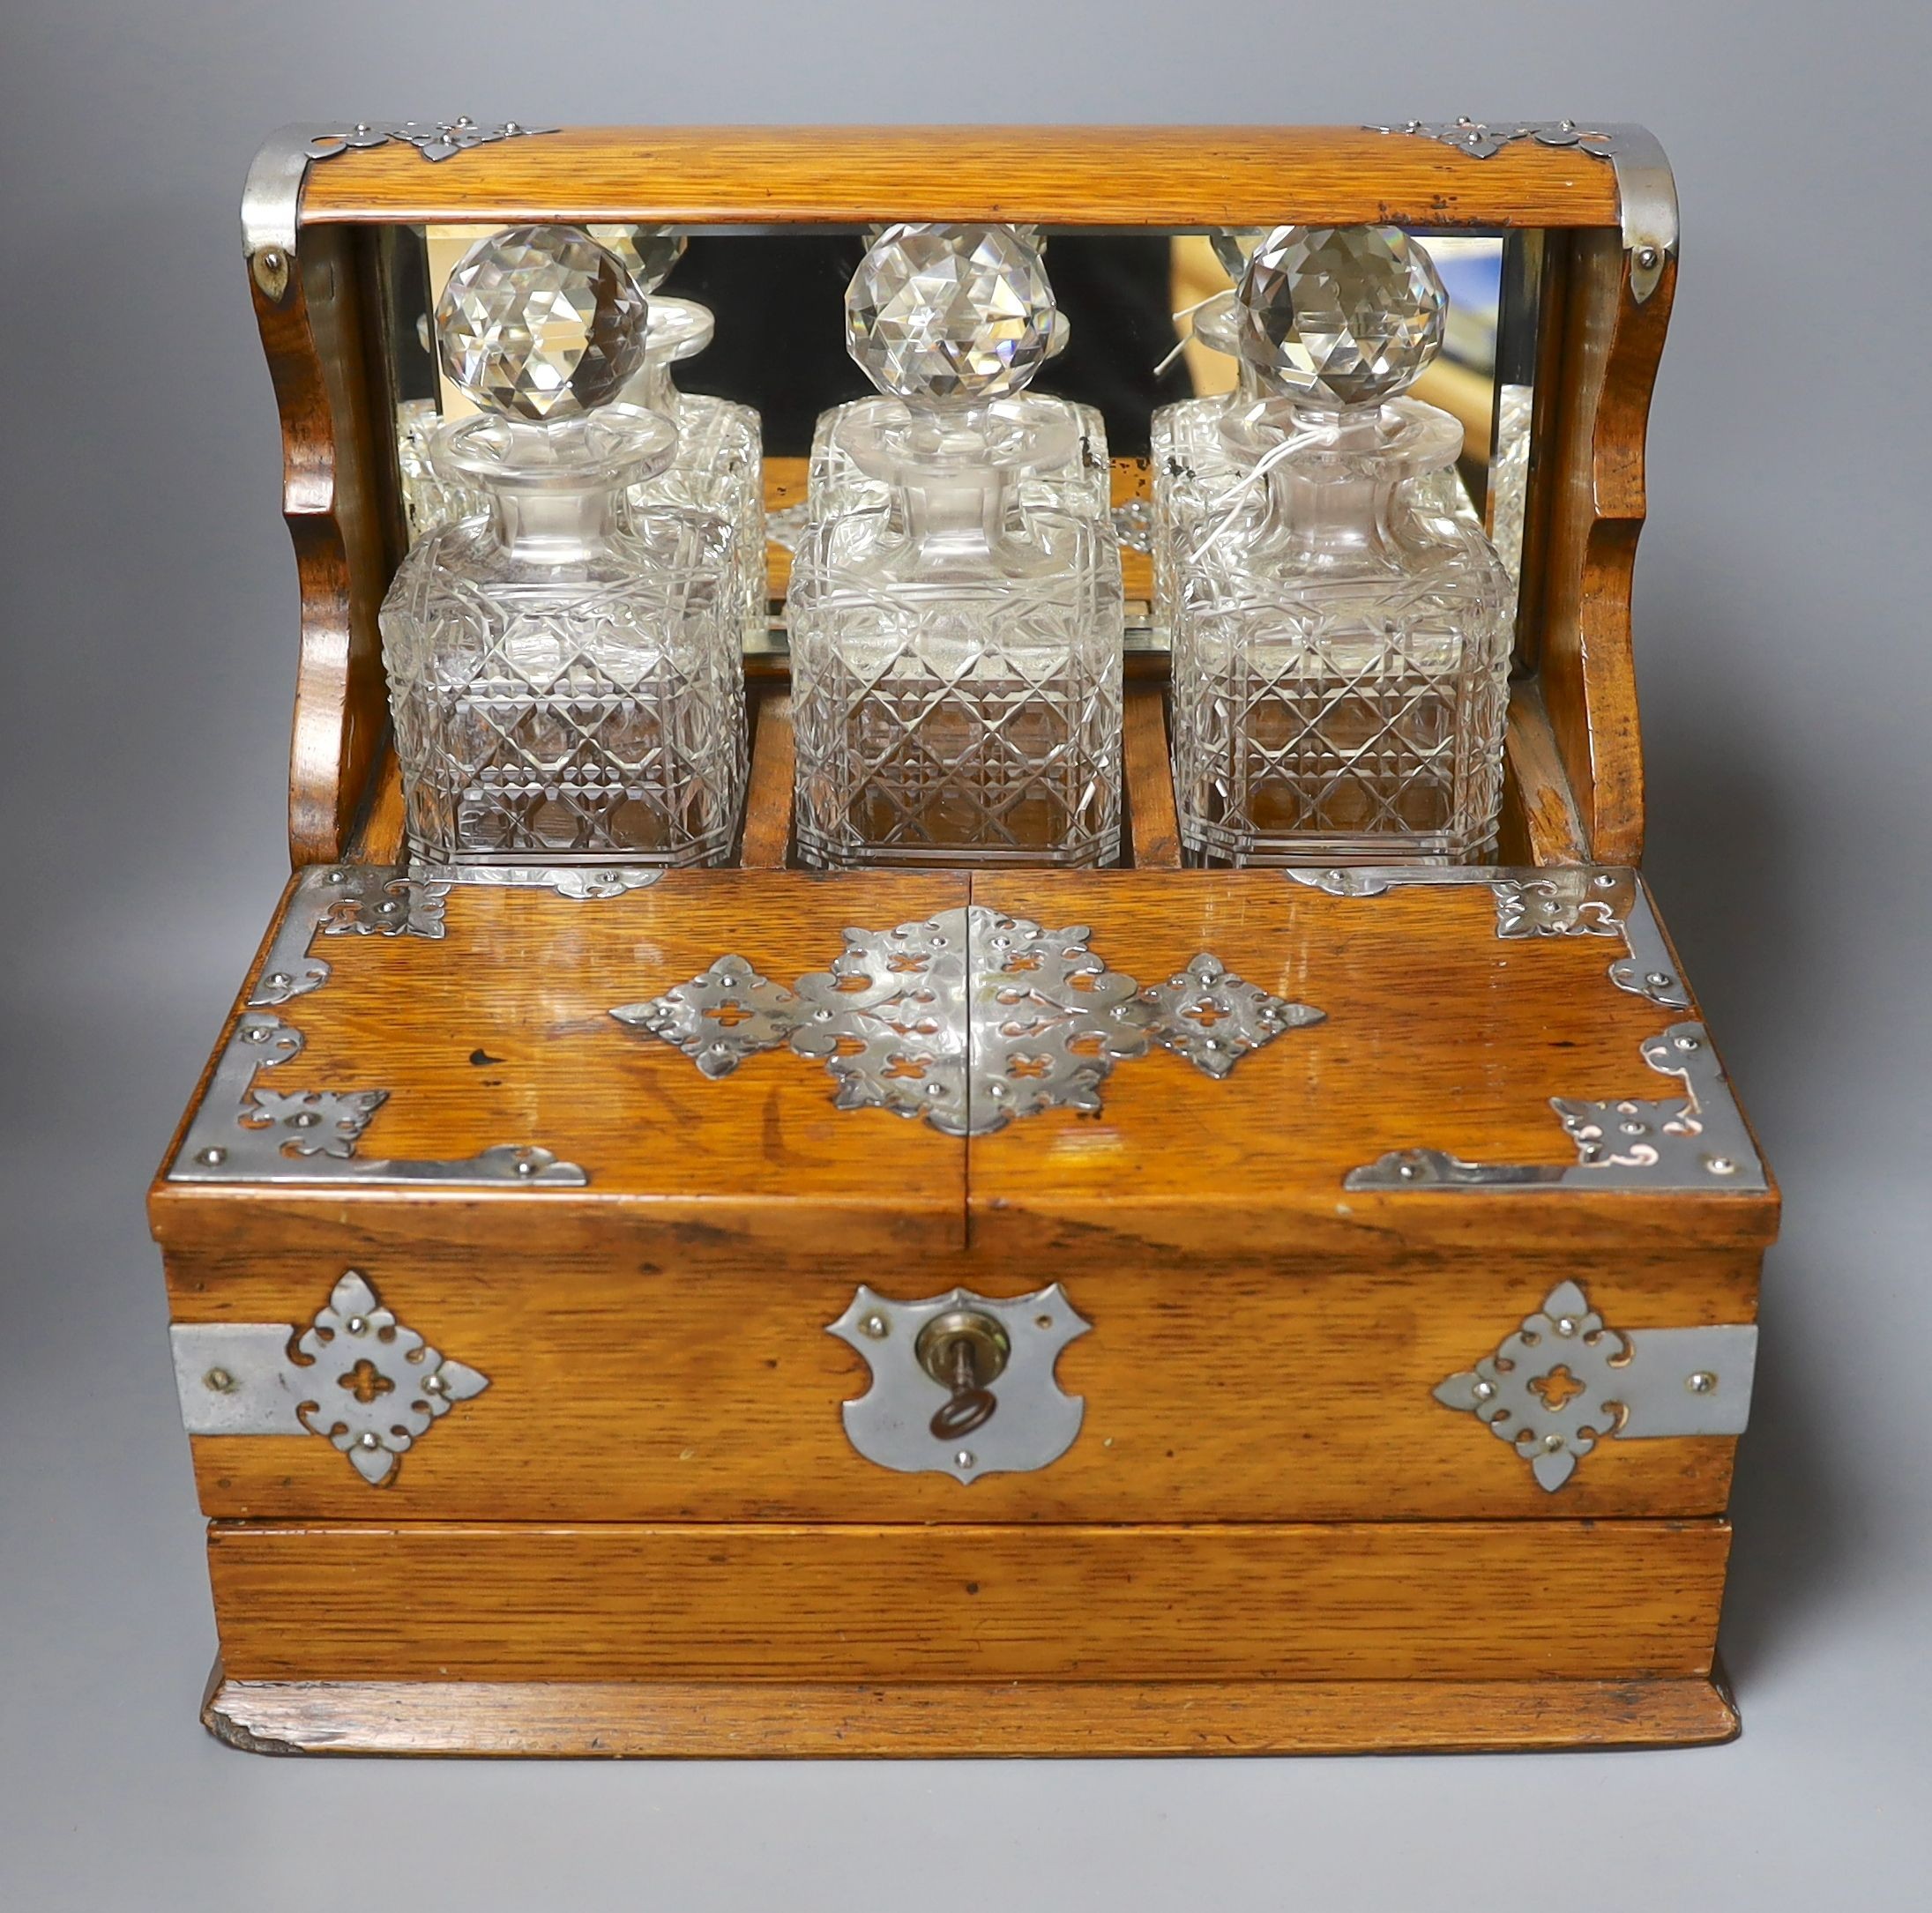 An Edwardian oak tantalus and combination games box with key - 33cm tall